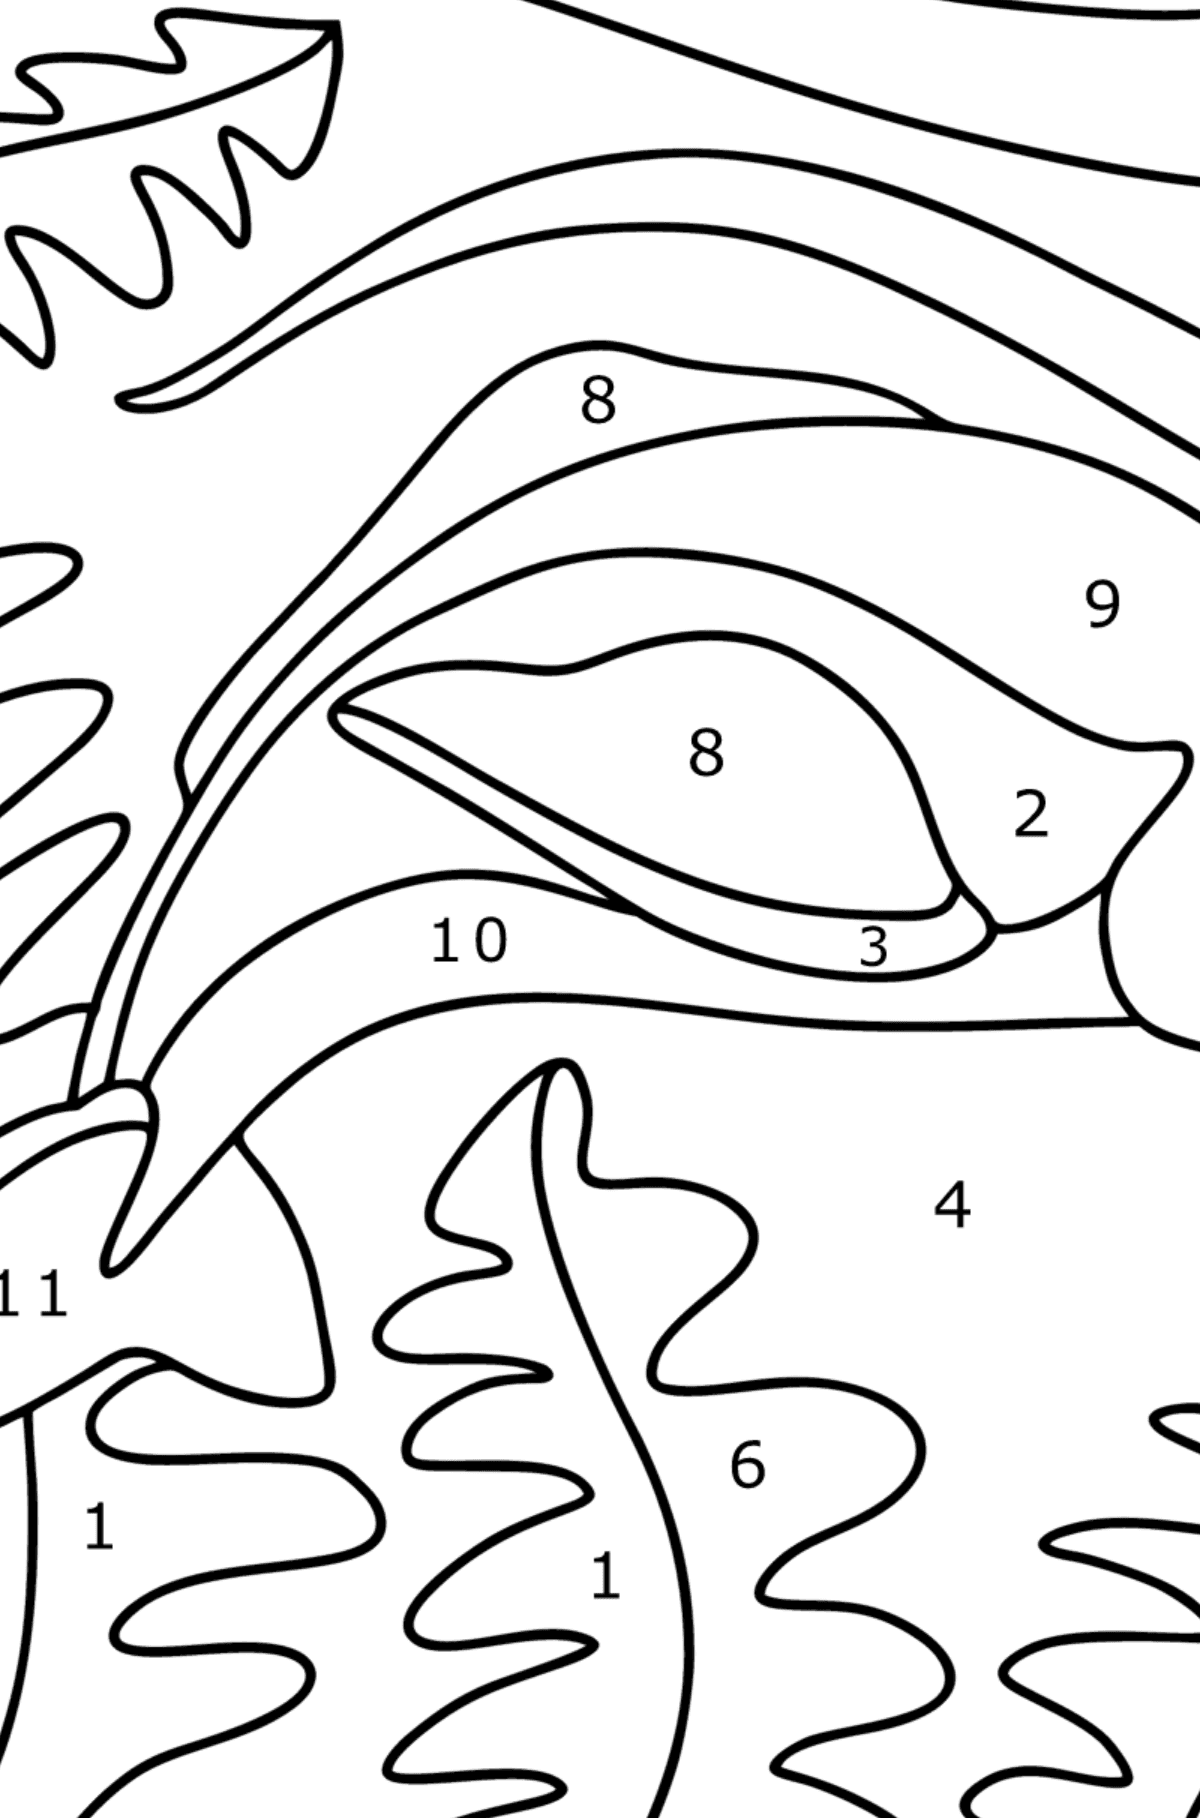 Chinese River Dolphin coloring page - Coloring by Numbers for Kids